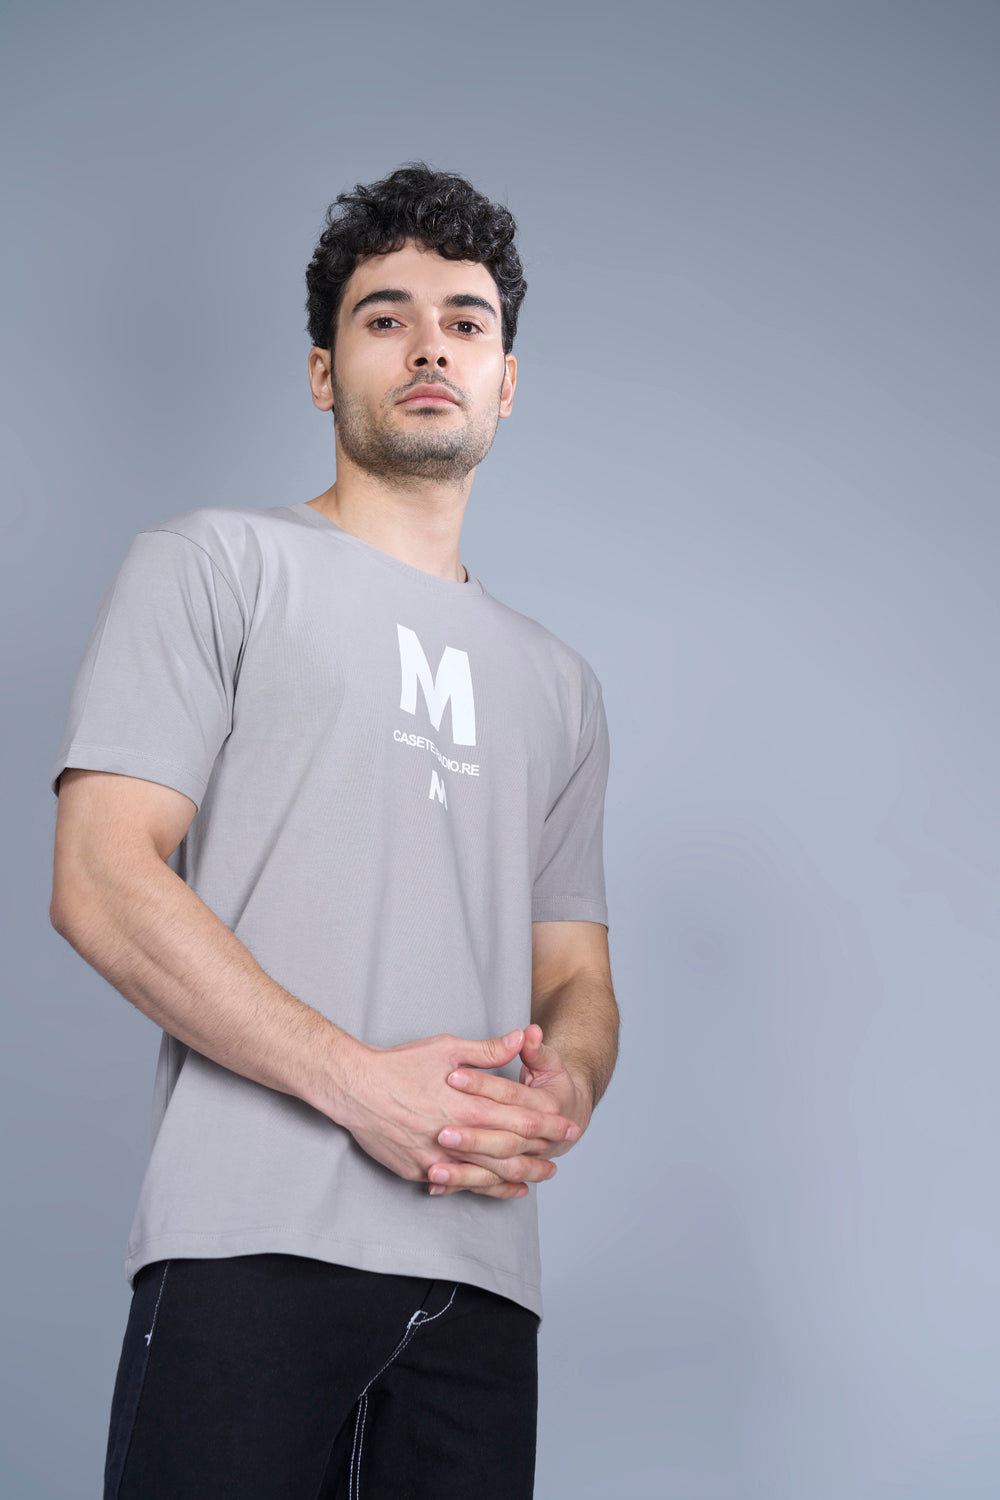 Cotton oversized T shirt for men in the solid color Vapour Blue with half sleeves and crew neck, side view.